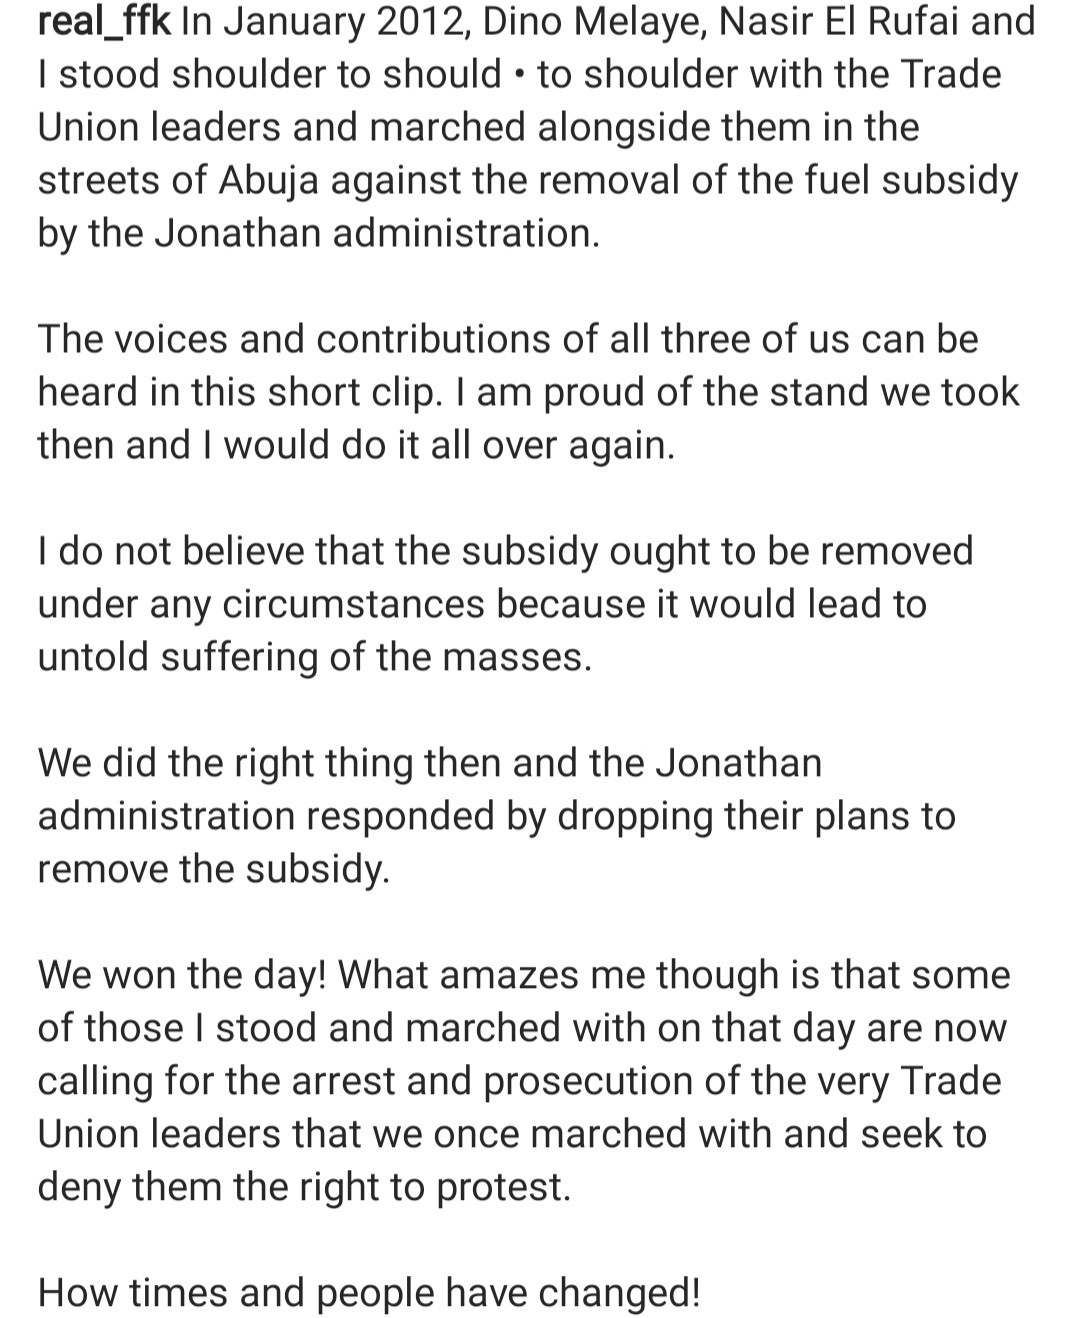 how time flies and people have changed ffk says as he shares old clips of him and el rufai protesting with trade union leaders against removal of fuel subsidy by jonathan administration 1